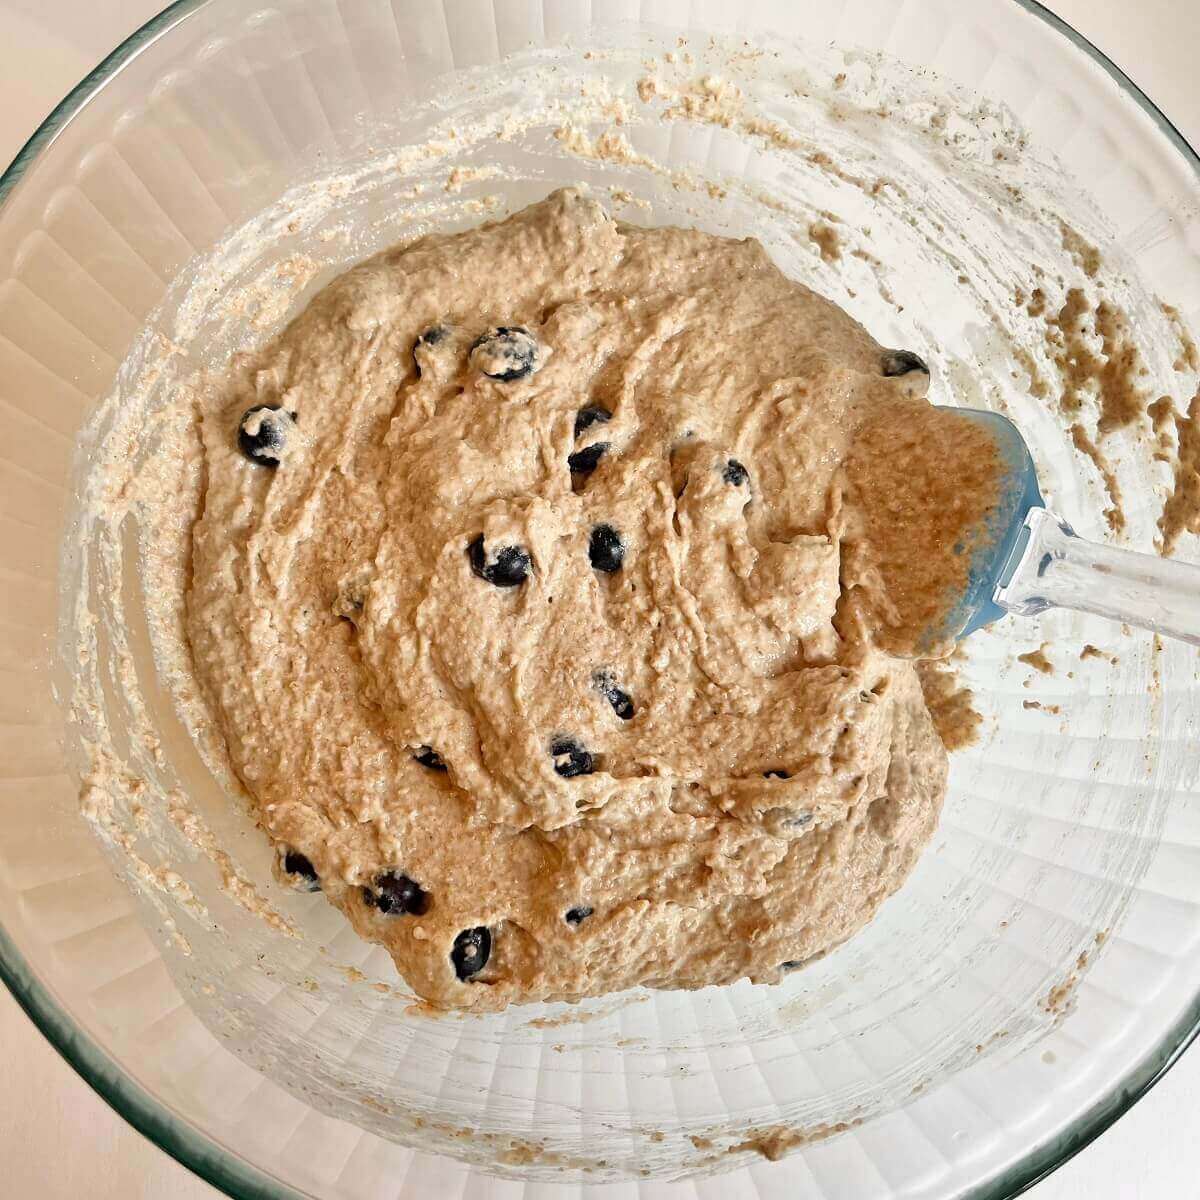 Blueberry cake batter in a glass mixing bowl.